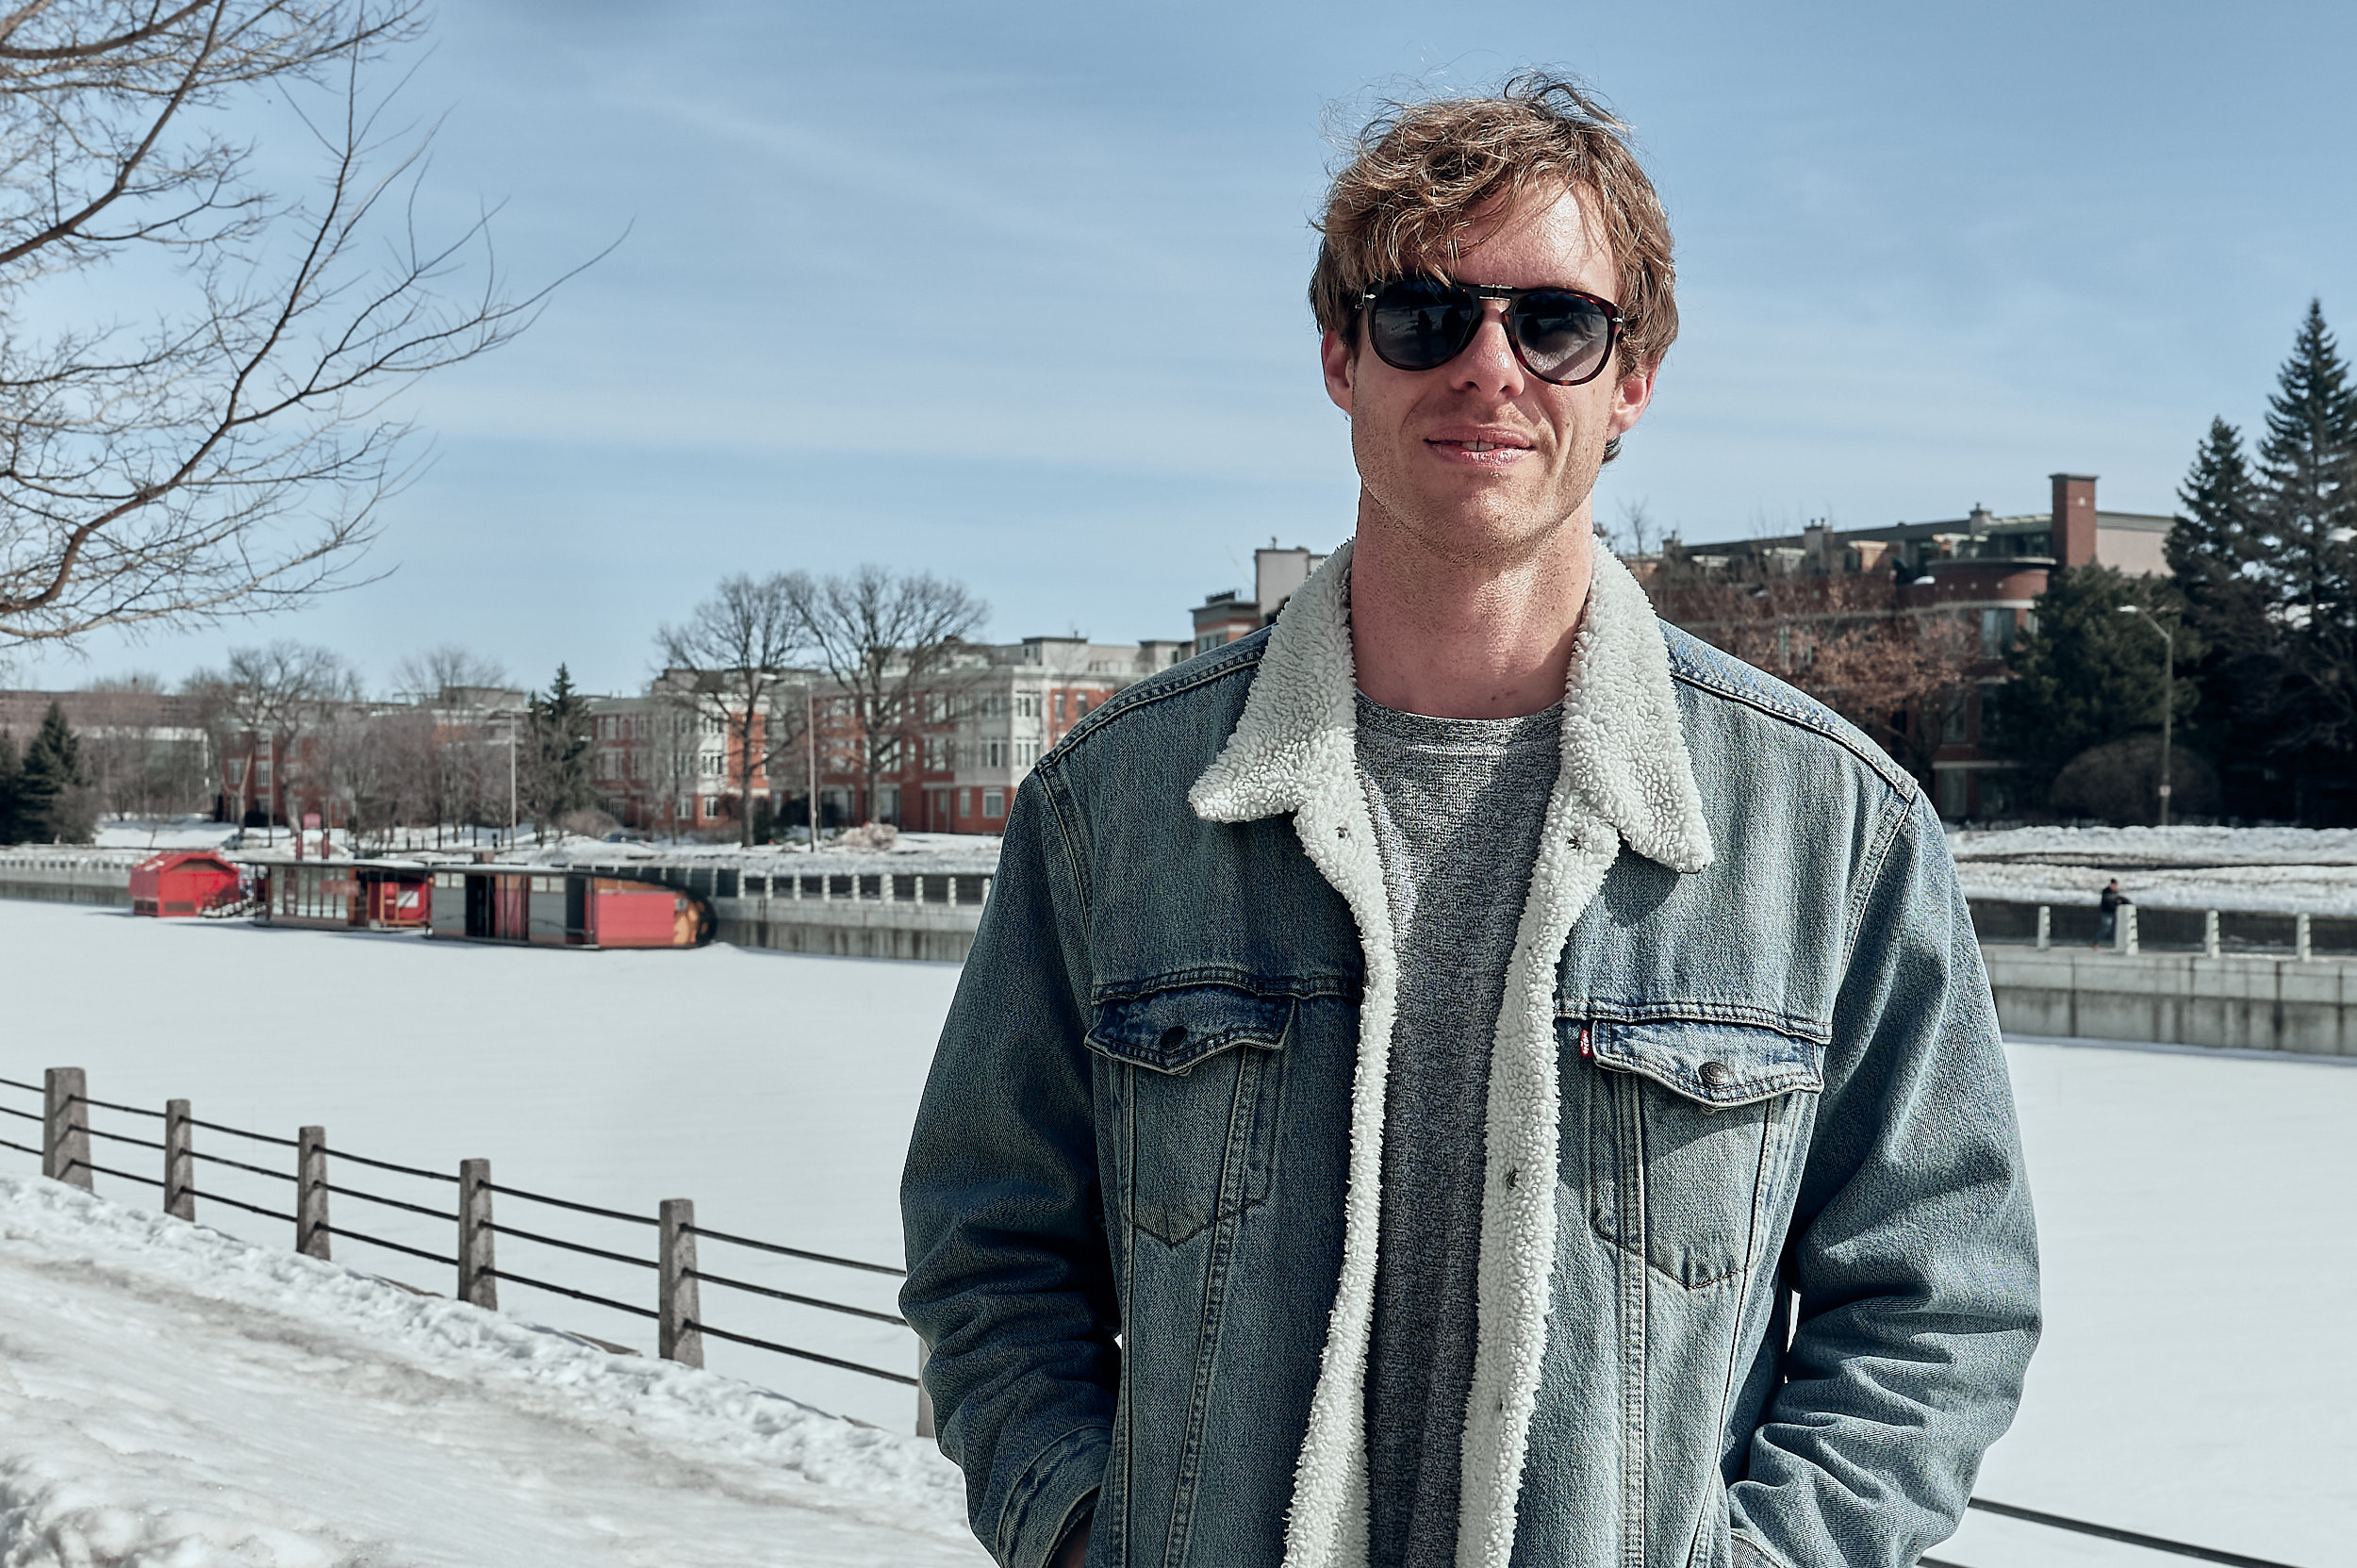 Ottawa resident Spencer Cuddington has skated on the Rideau Canal since childhood, and said he thinks this year's closure is linked to climate change.